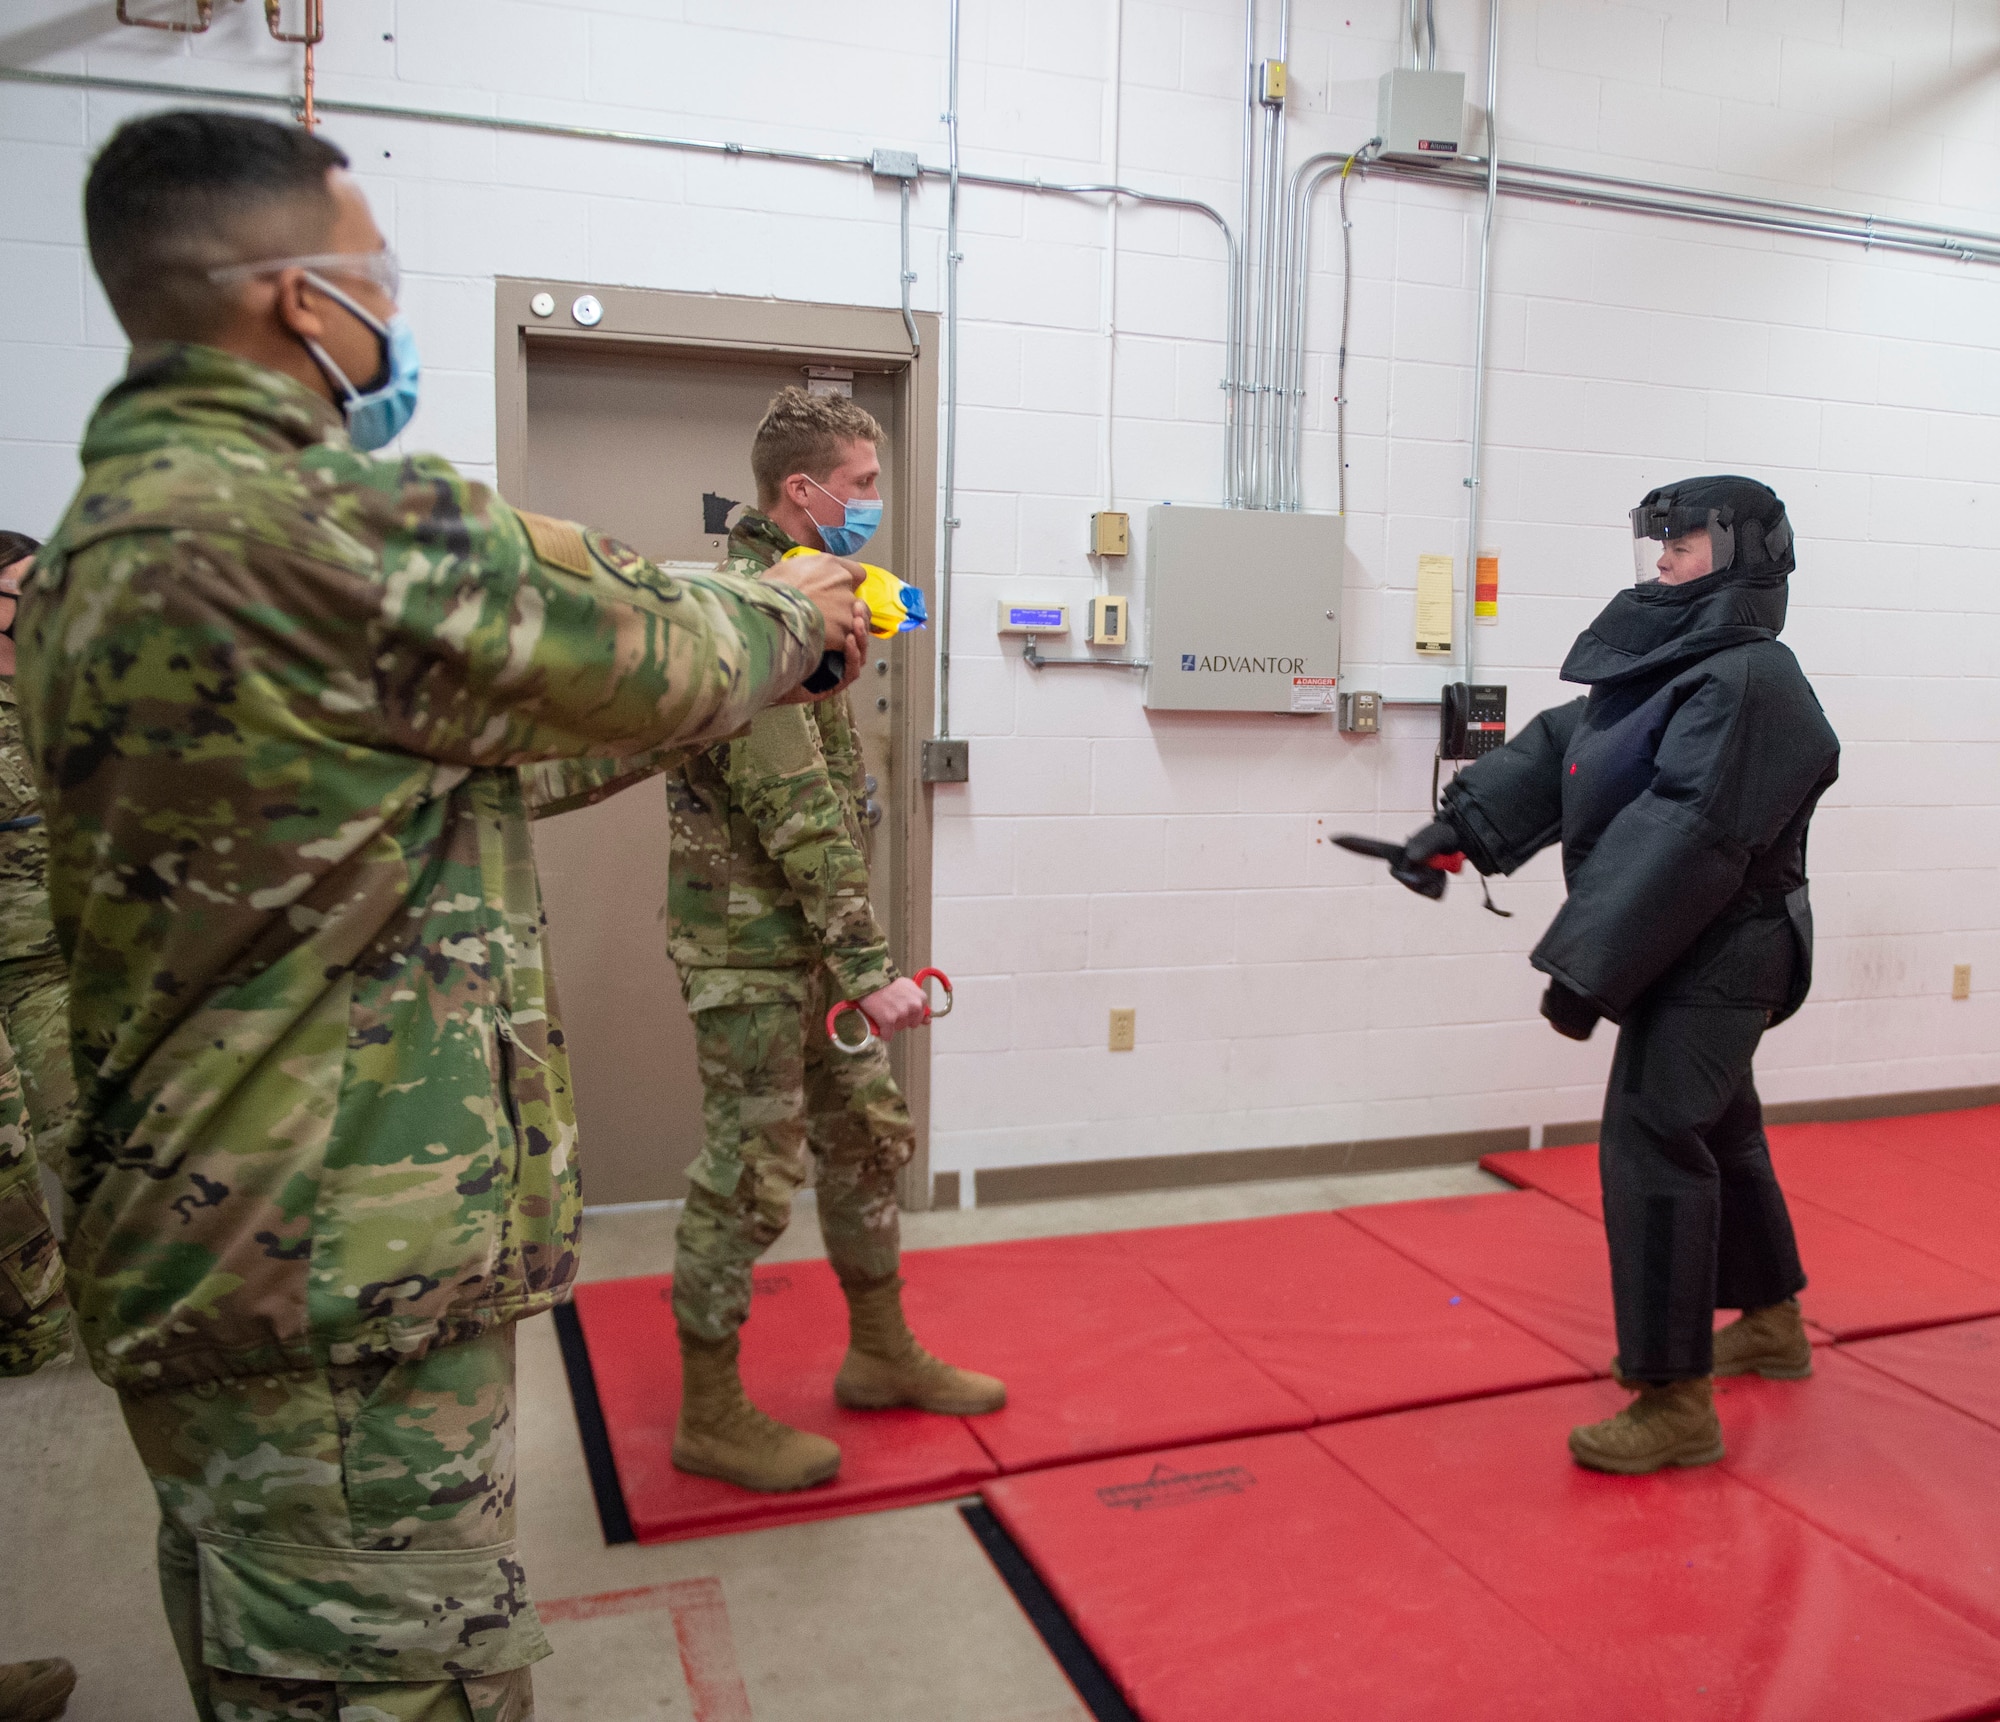 U.S. Air Force Senior Airman Jordan Hopwood, left, and Airman 1st Class Benjamin Brama, right, 133rd Security Forces Squadron, attempt to de-escalate and handcuff simulated aggressor Staff Sgt. Jeffrey Fouts in St. Paul, Minn., Jan. 07, 2022.